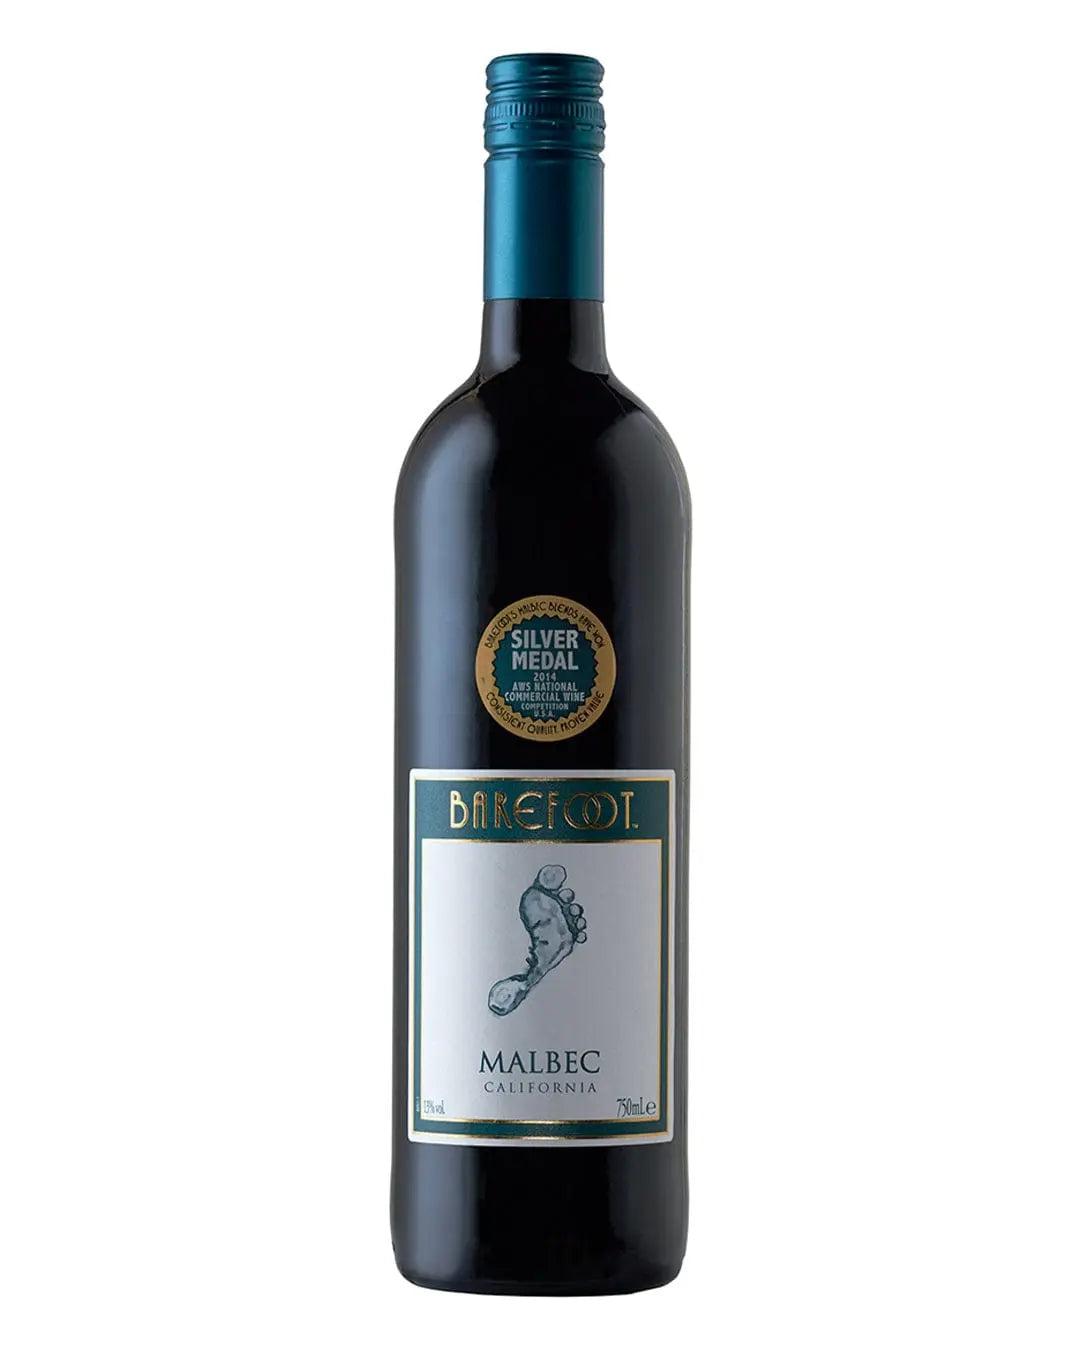 Barefoot Malbec Red Wine, 75 cl Red Wine